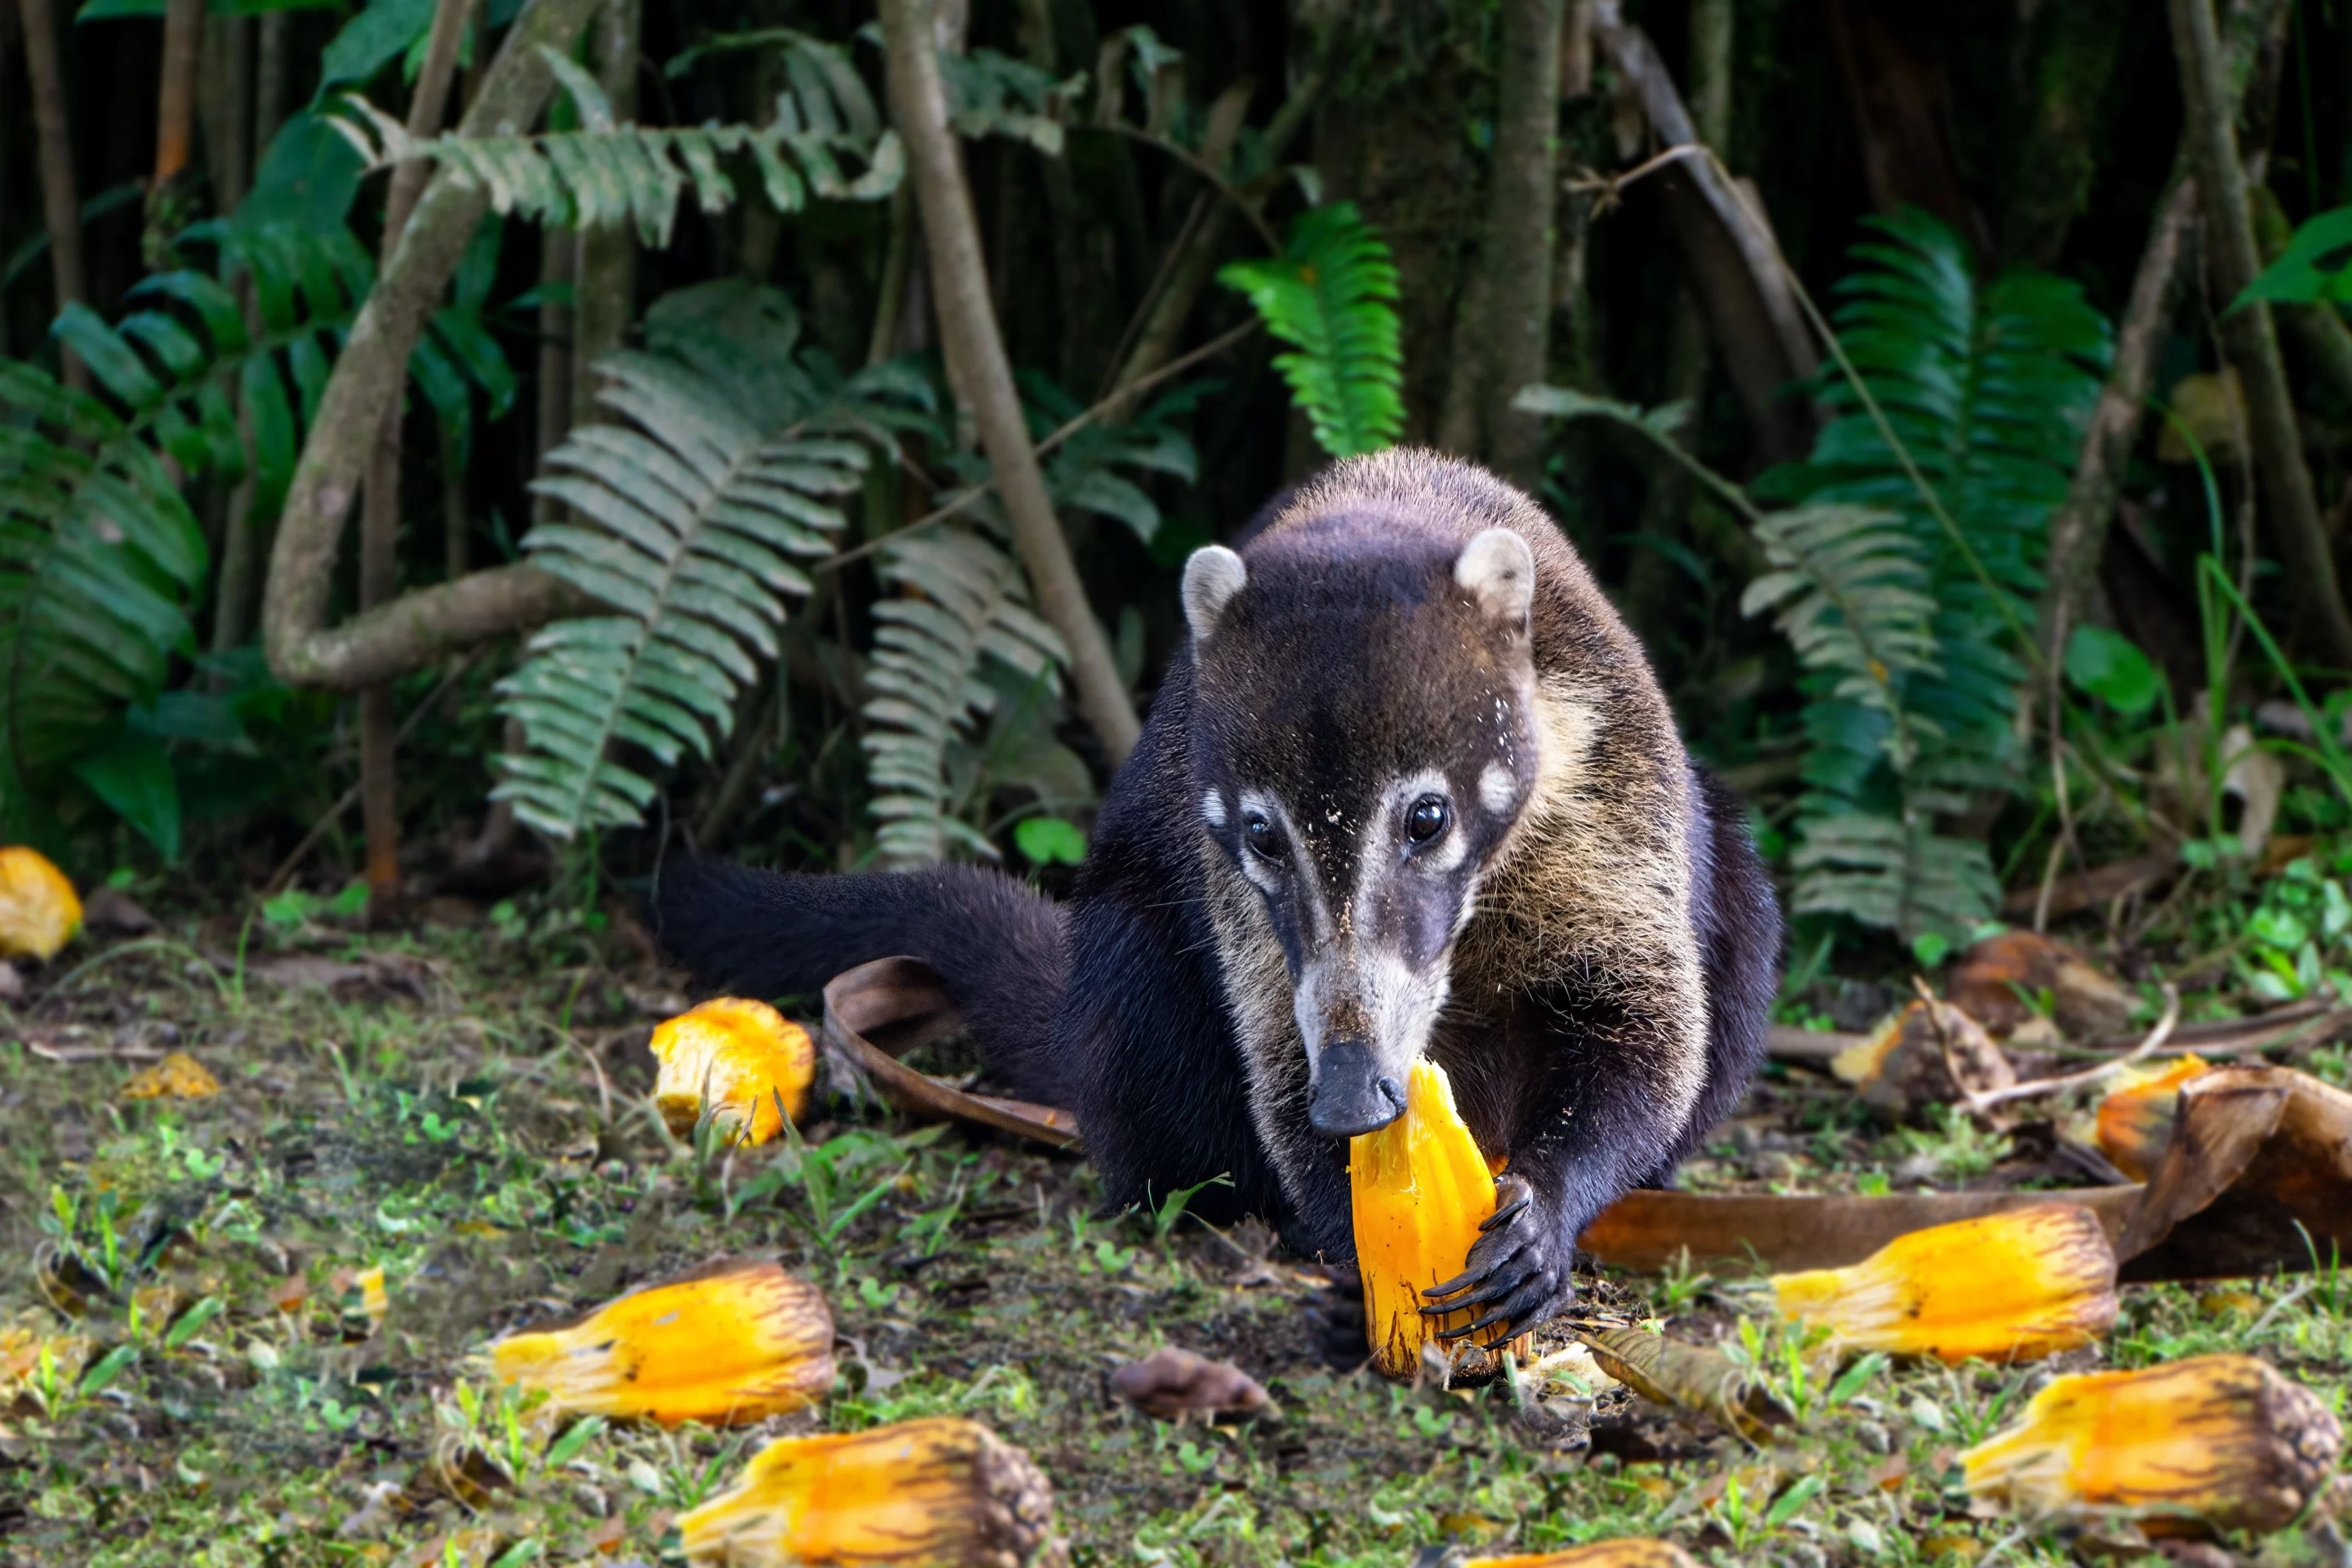 Watch coatis and agoutis scurry along the forest floor!